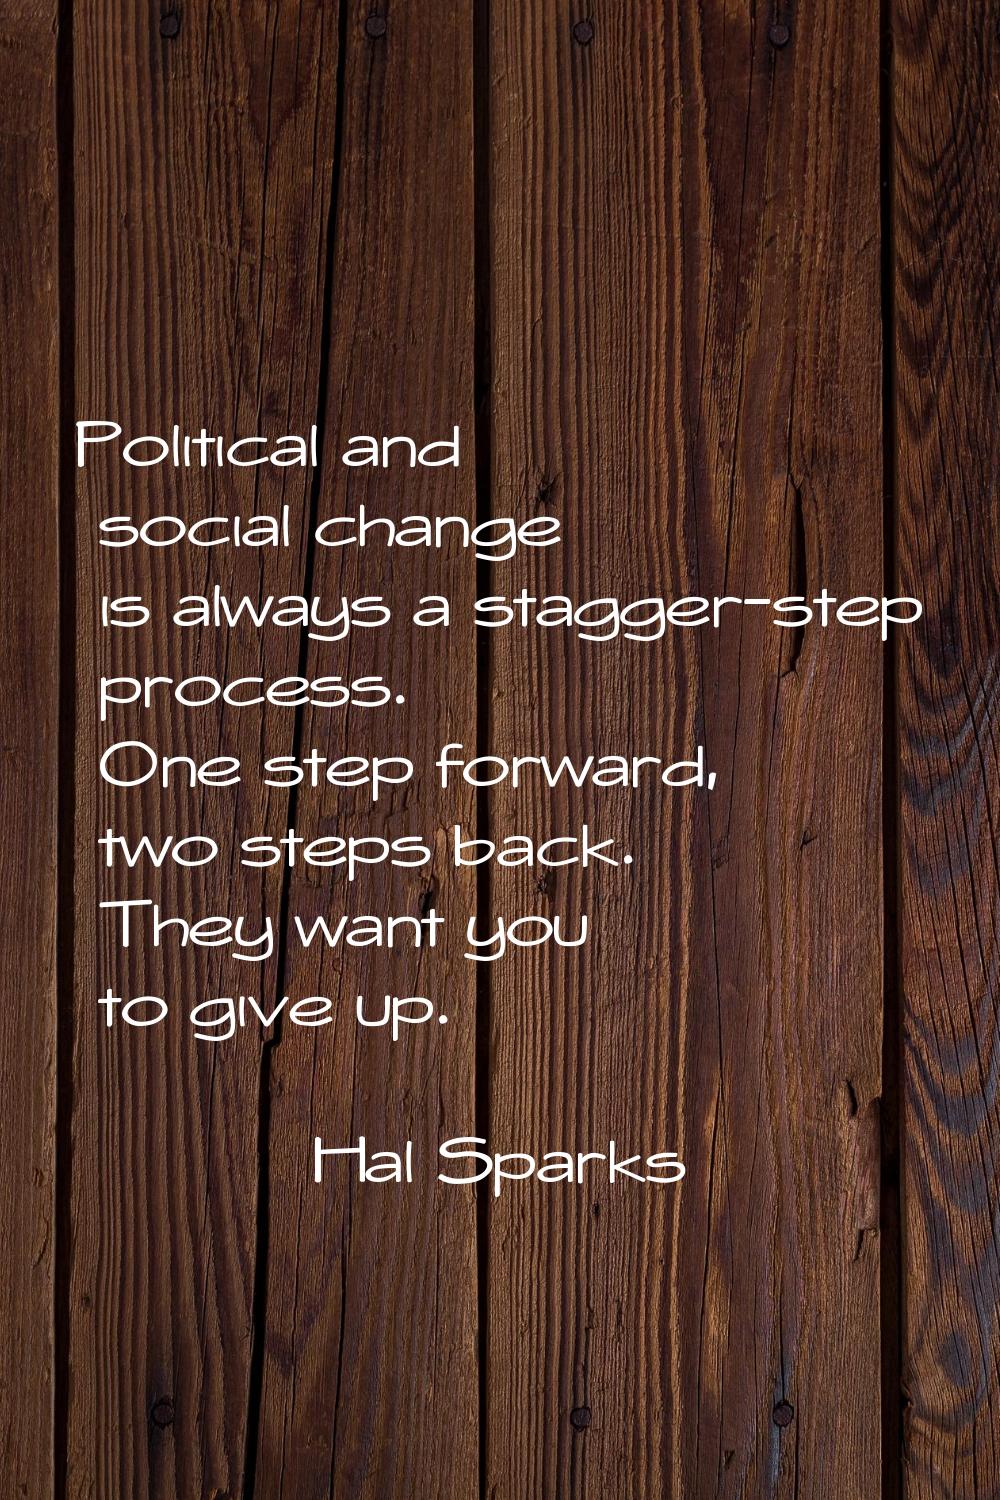 Political and social change is always a stagger-step process. One step forward, two steps back. The